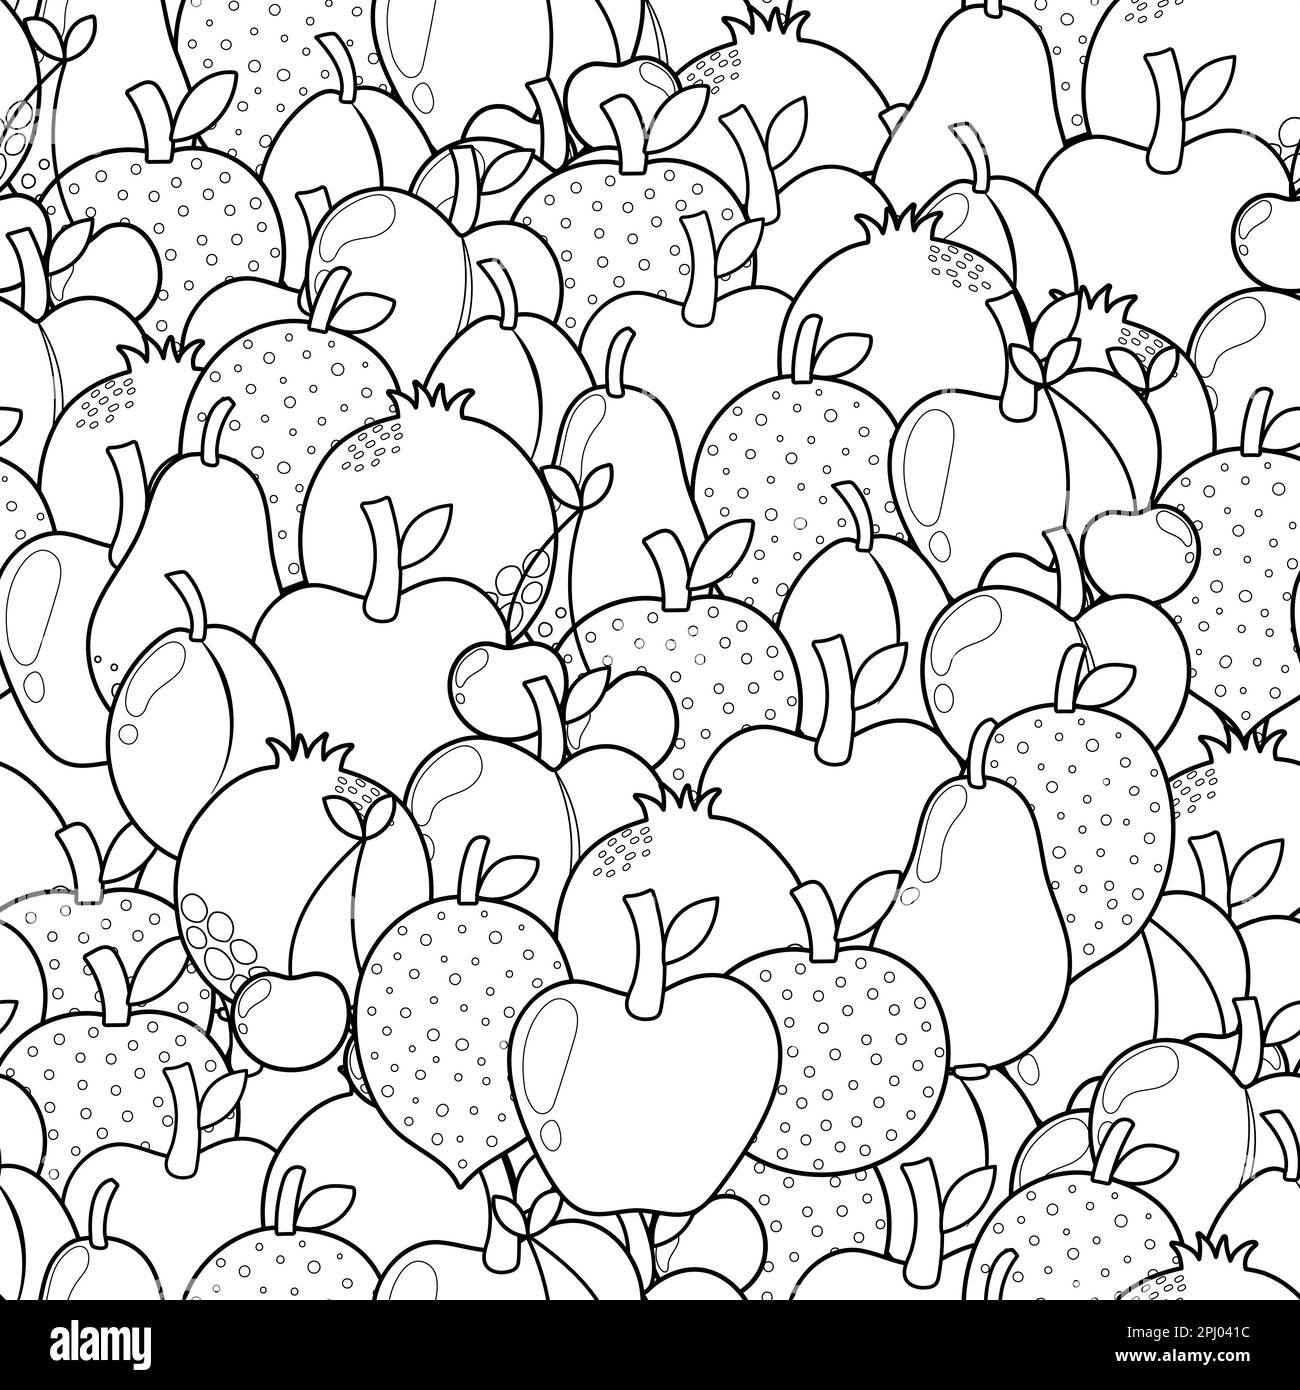 Doodle fruits black and white seamless pattern. Coloring page with apple, lemon Stock Vector